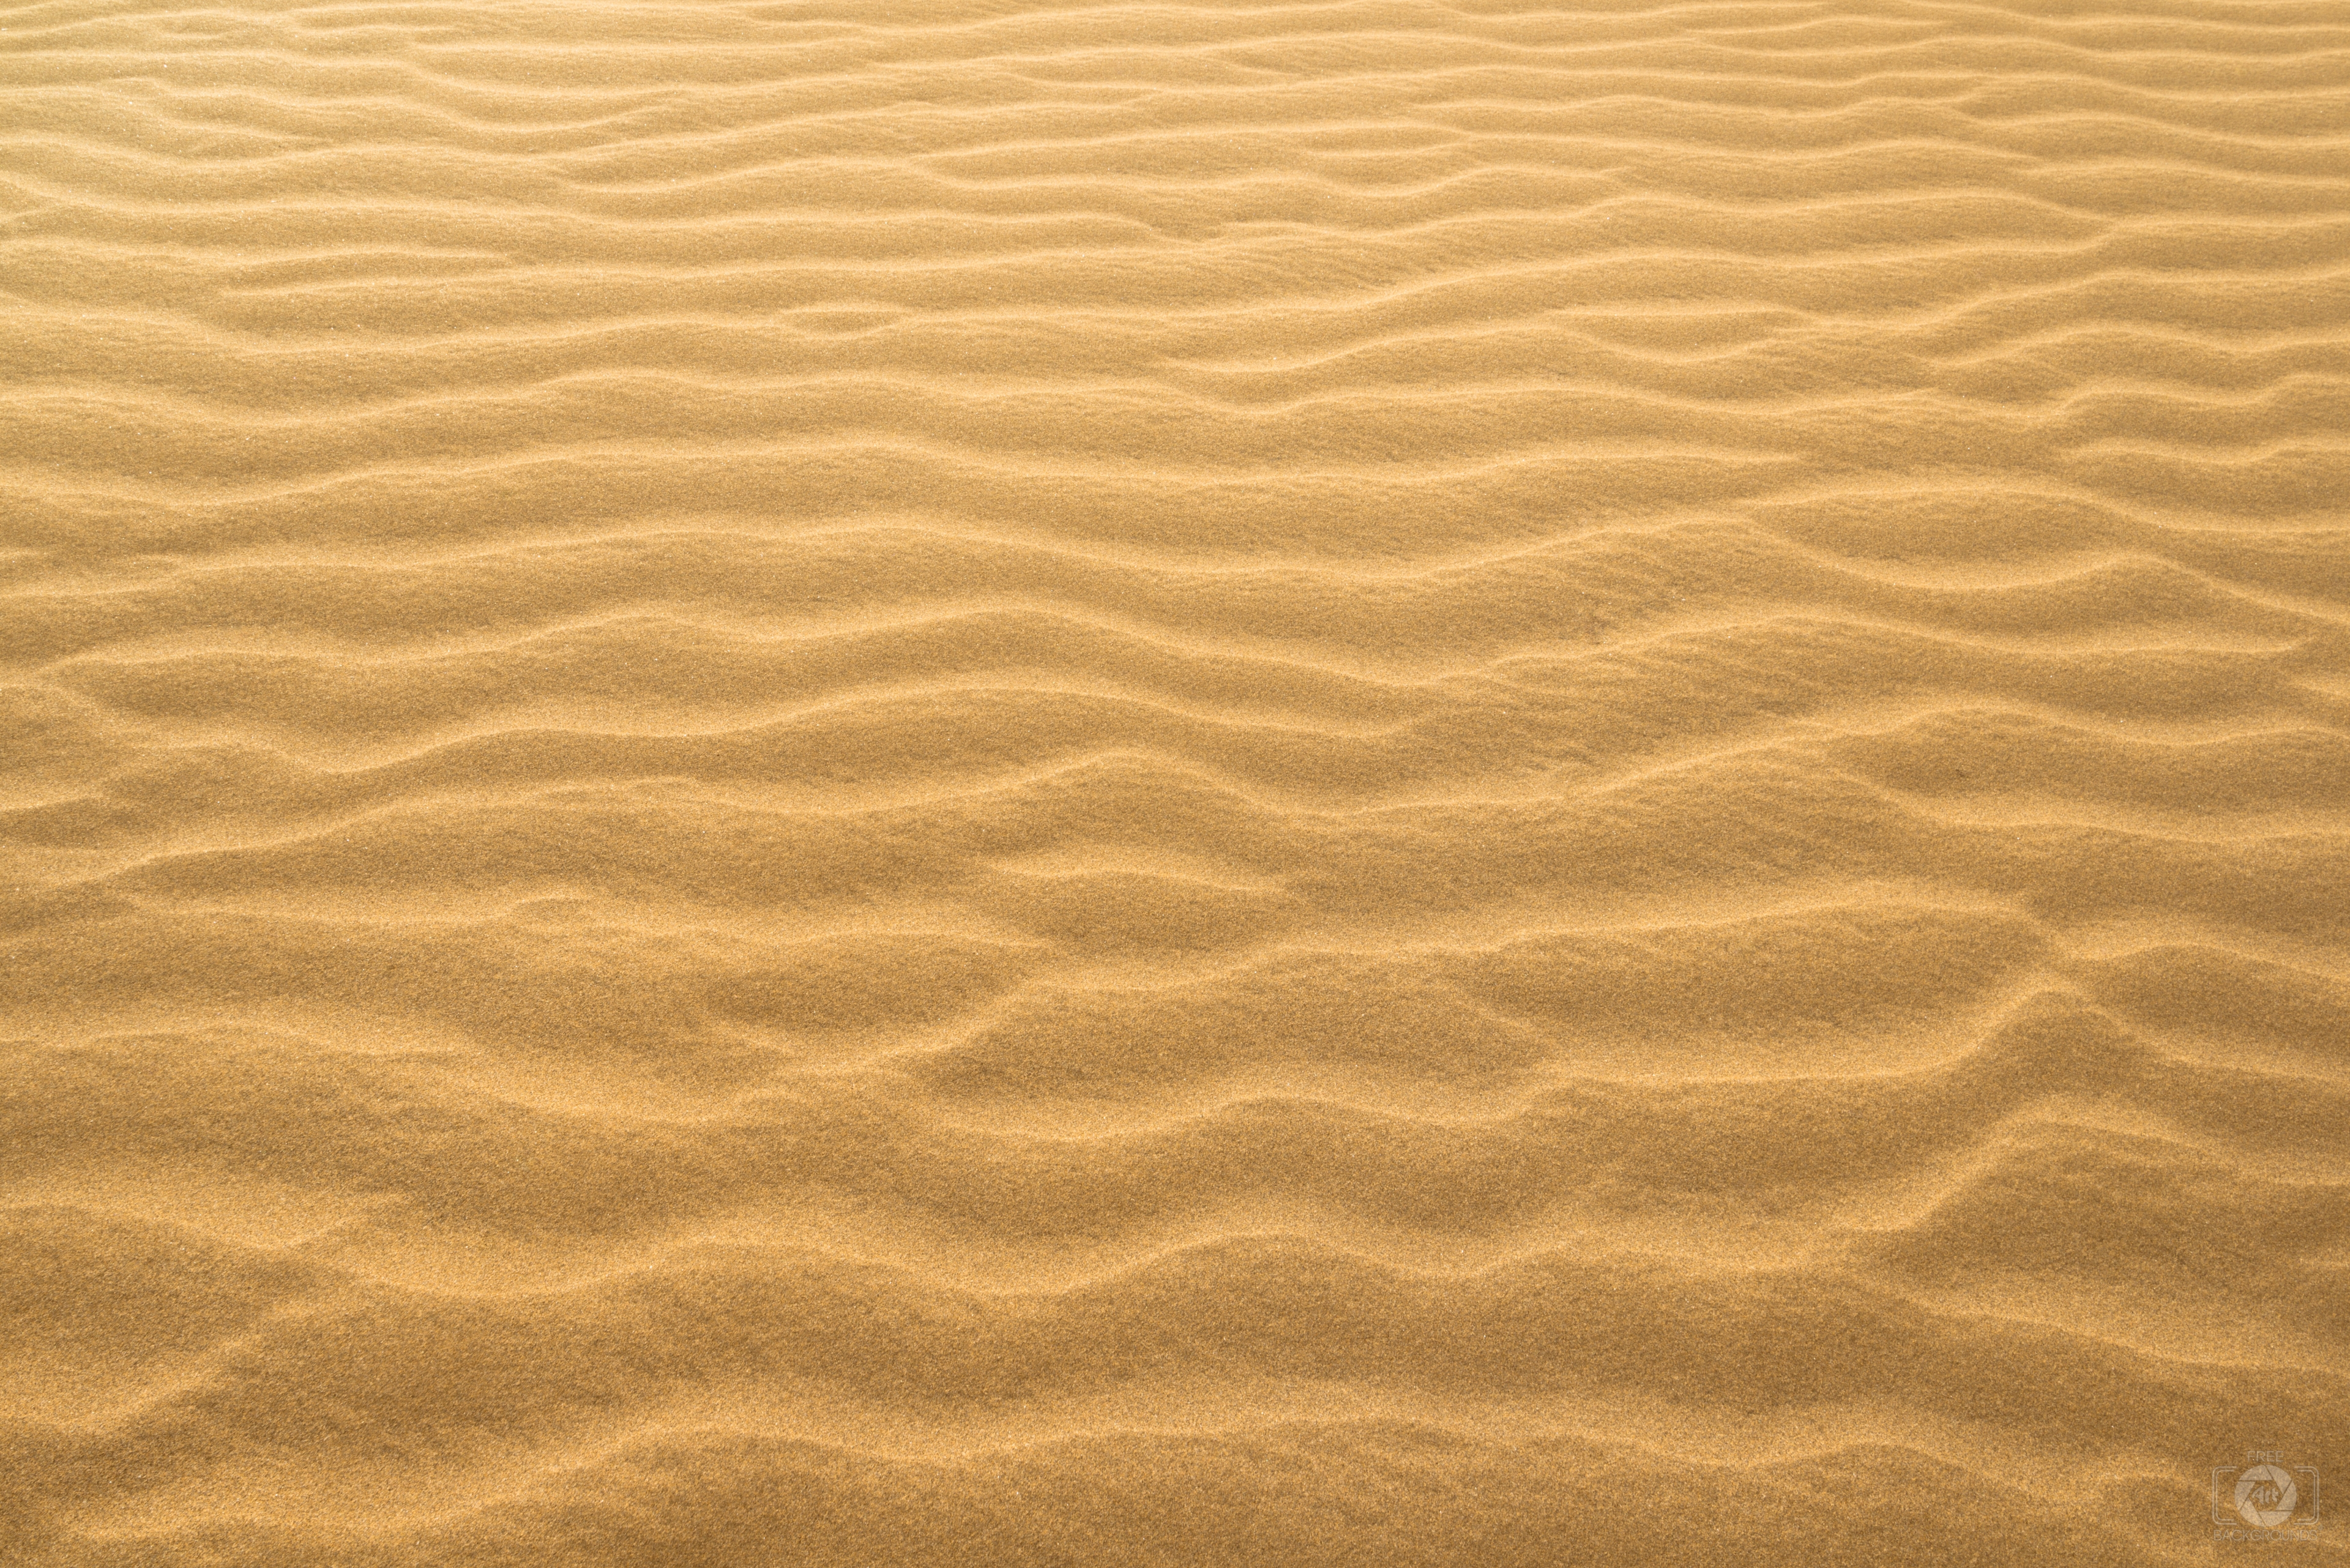 Desert Sand Texture High Quality Free Backgrounds